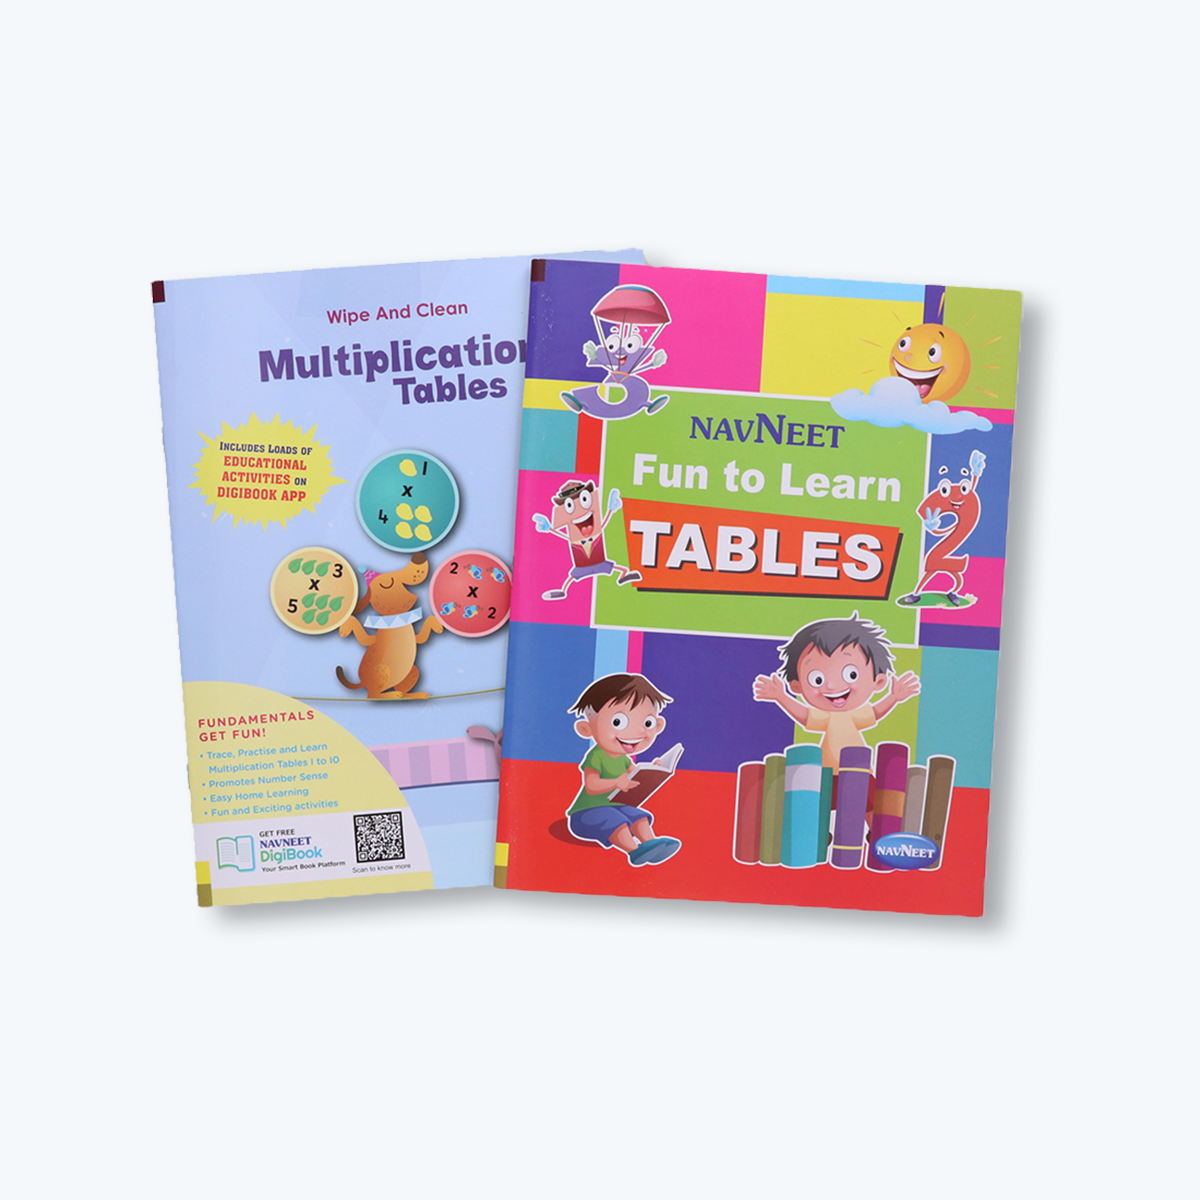 Navneet's Wipe and Clean Multiplication and Fun to Learn Tables series,Multiplication Tables From 1 - 20 with Fun and Easy Math Activities for Children